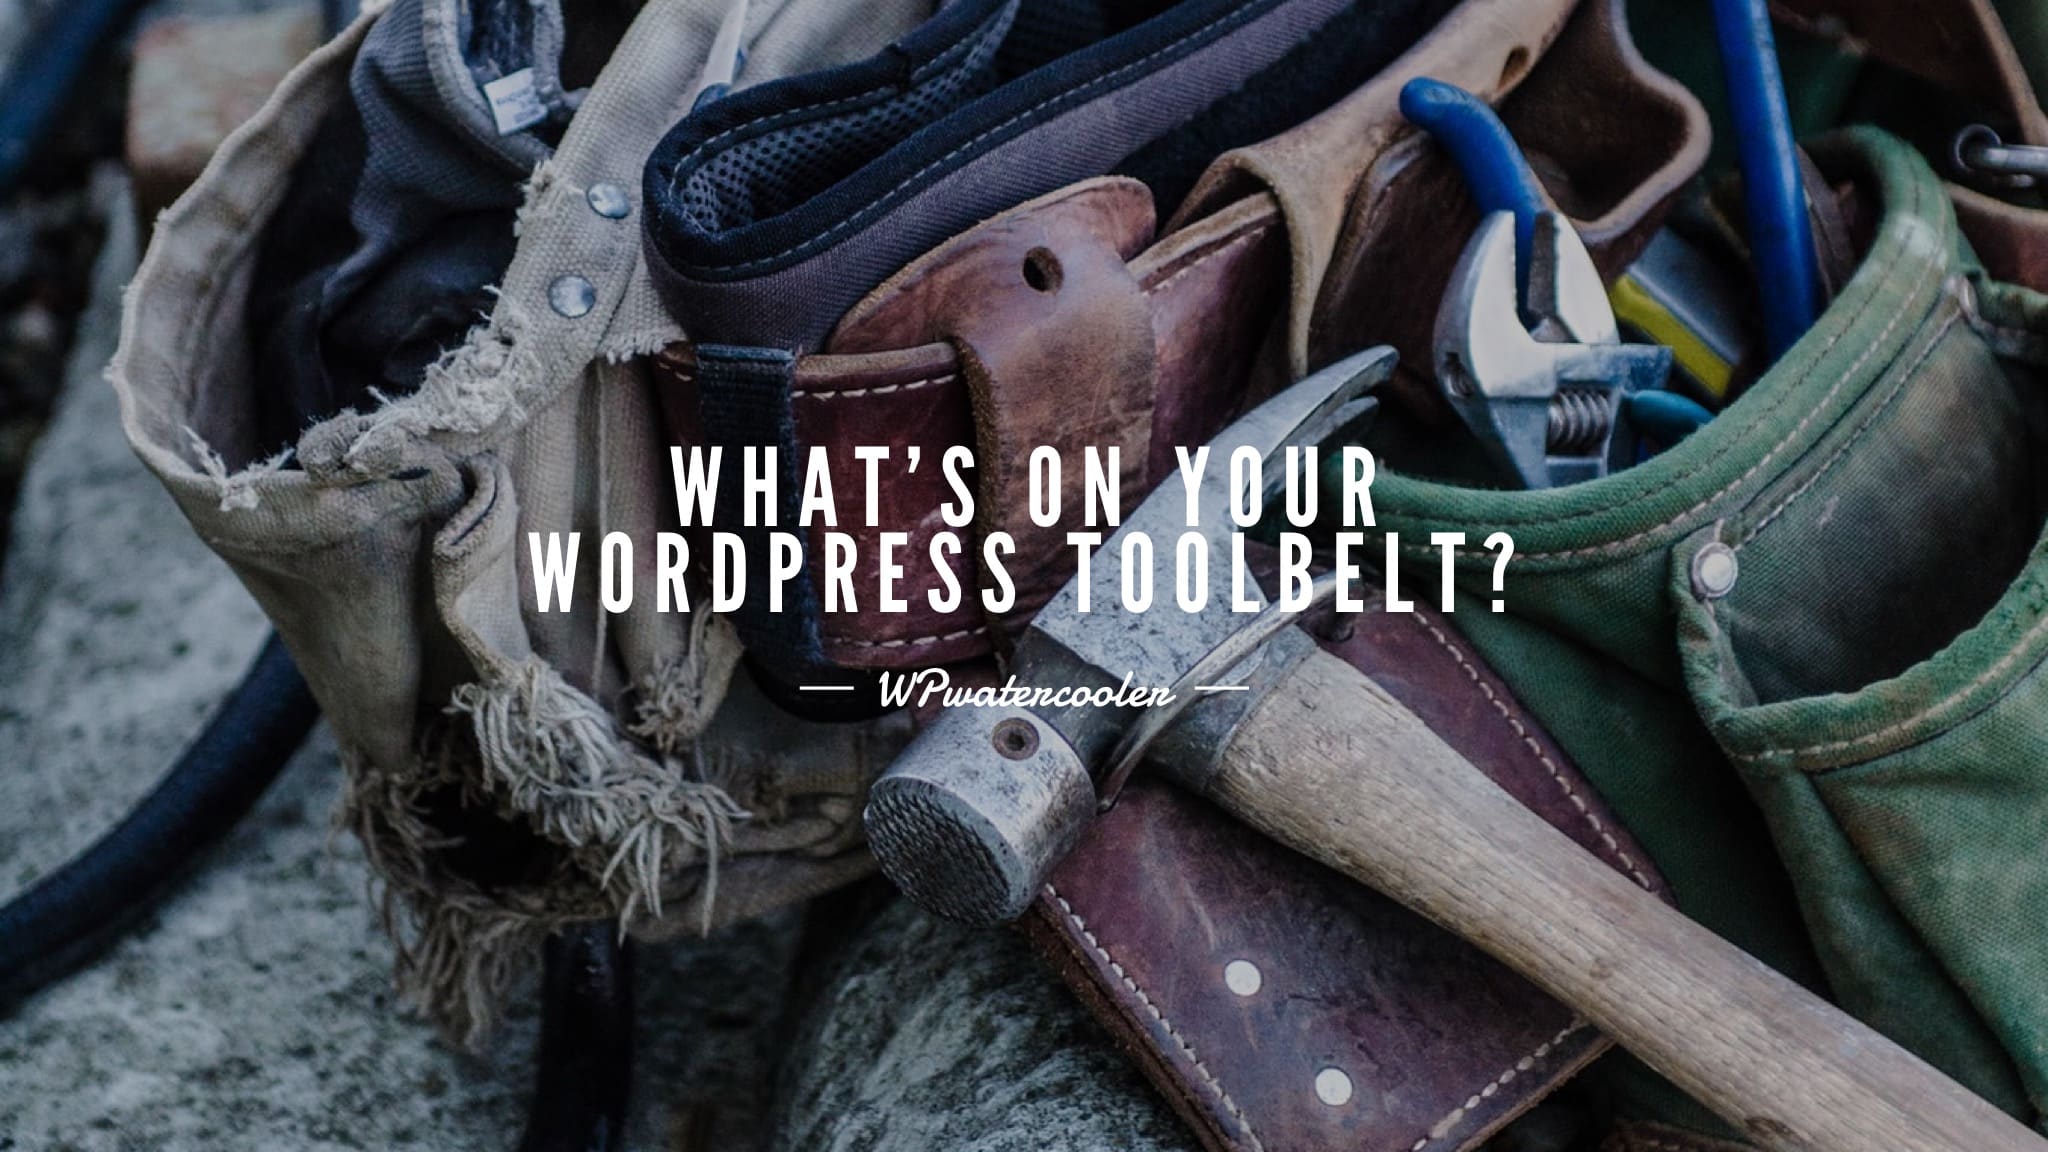 EP336 - What's on your WordPress toolbelt?